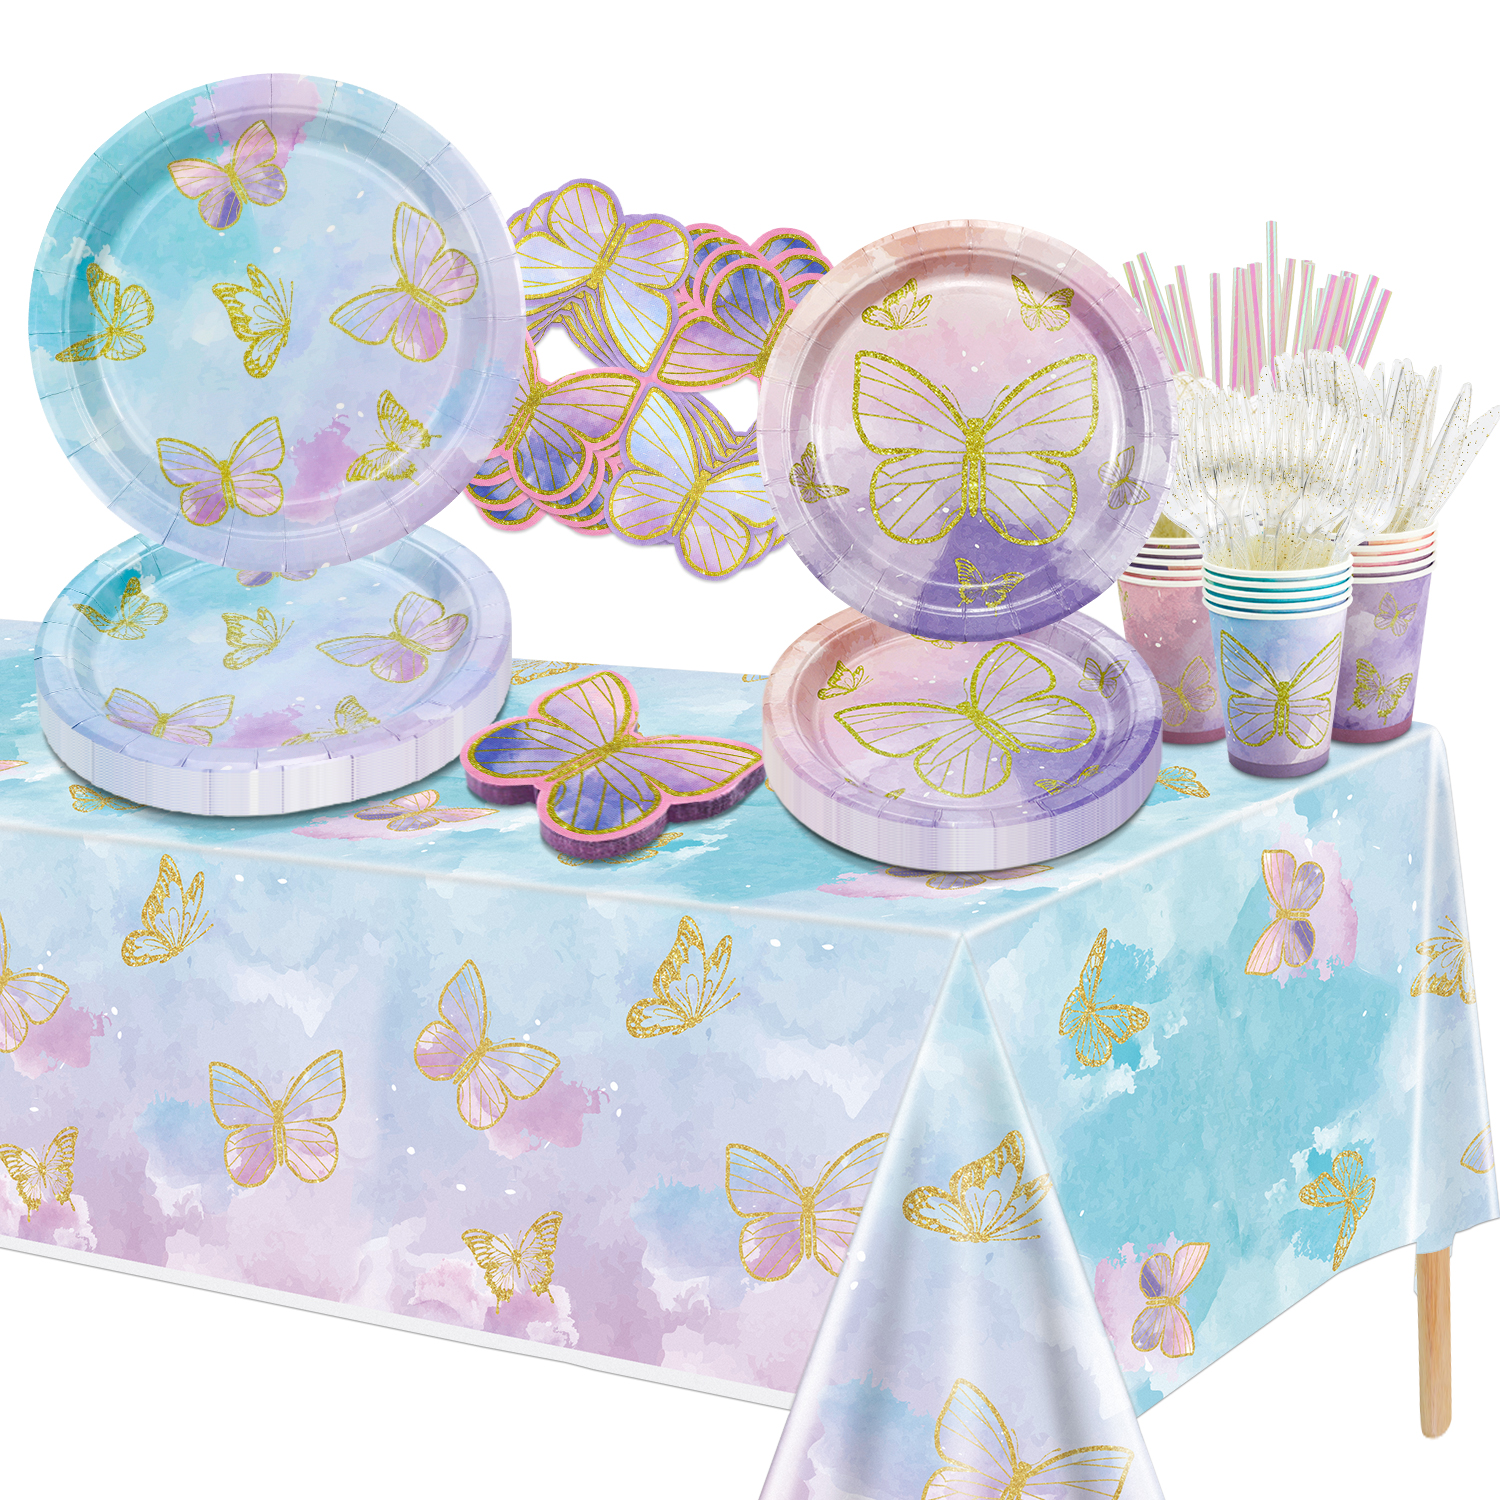 166 Pcs Butterfly Birthday Decorations - Including Butterfly Paper Plates, Napkins, Cups, Tablecloth and Straws for Fairy Birthday Decorations Butterfly Birthday Party Supplies, Serve 20 - image 1 of 7